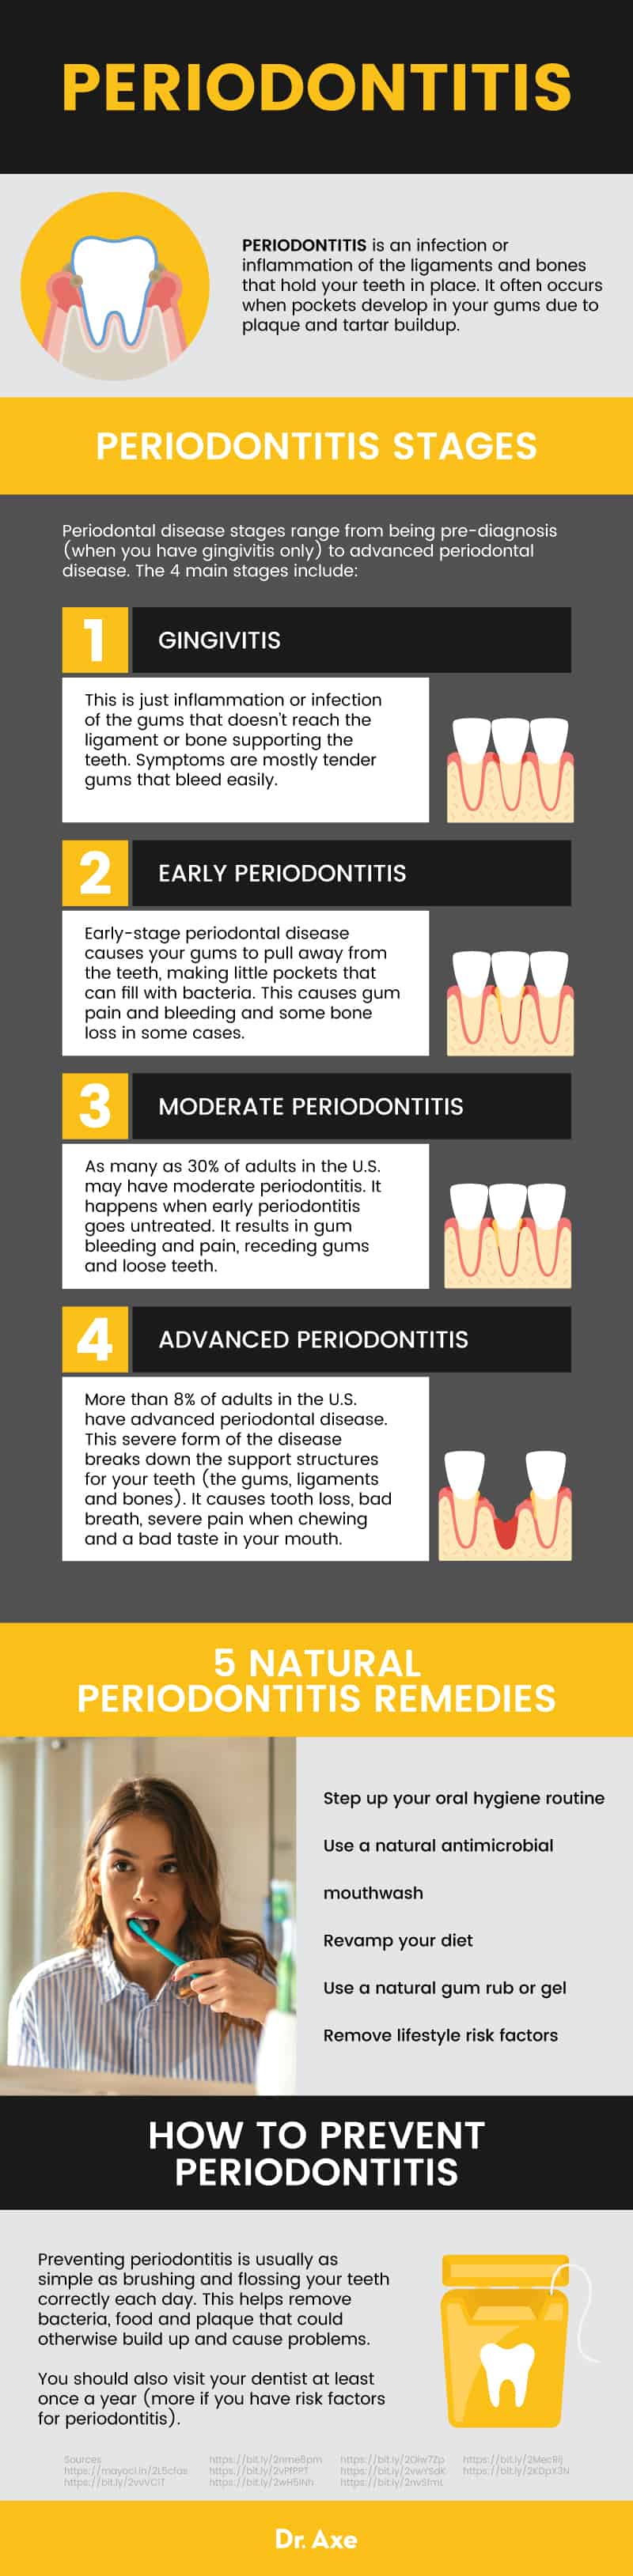 What is periodontitis? - Dr. Axe